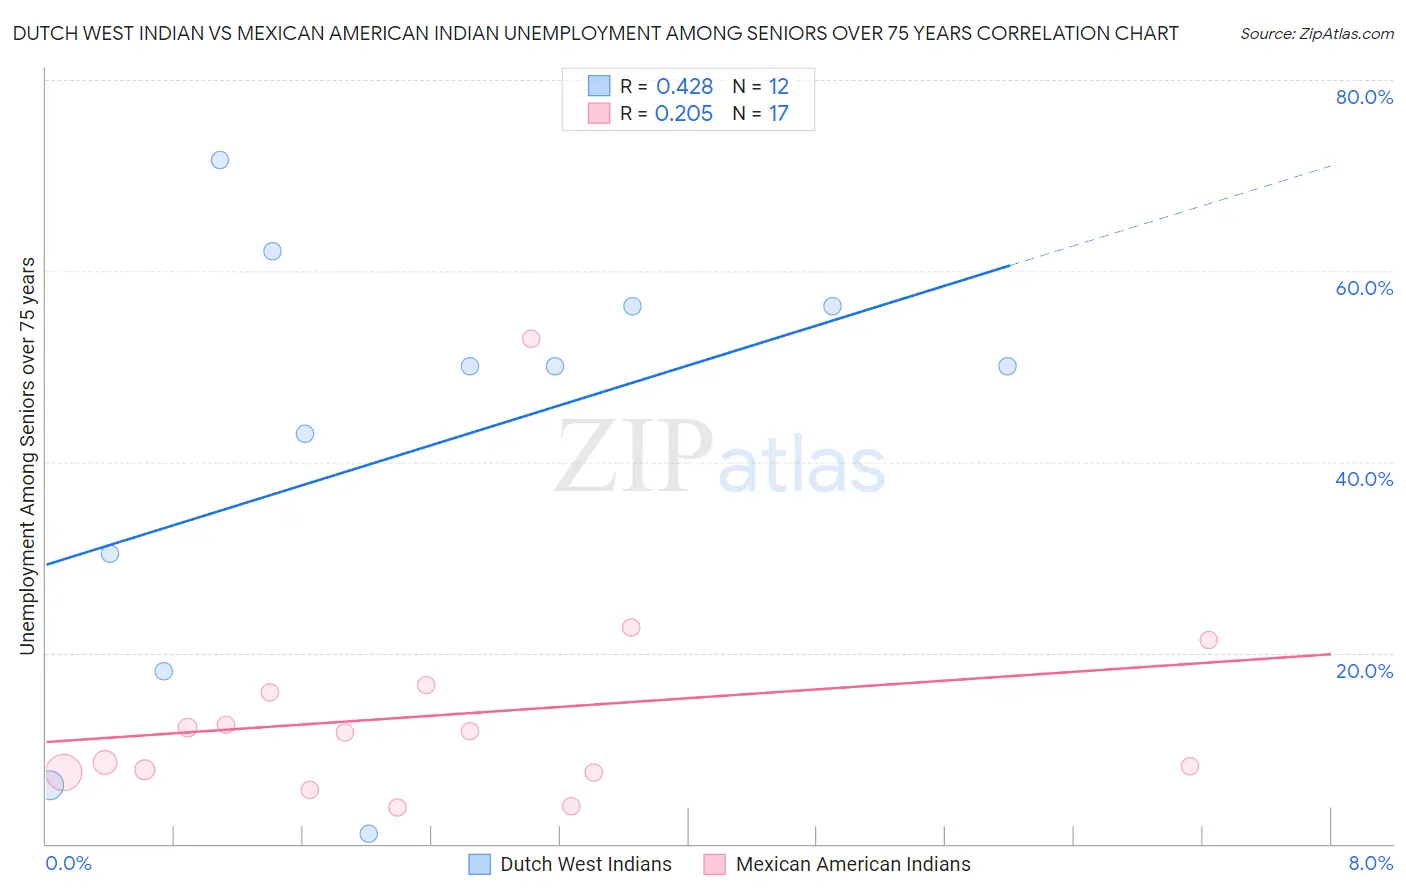 Dutch West Indian vs Mexican American Indian Unemployment Among Seniors over 75 years